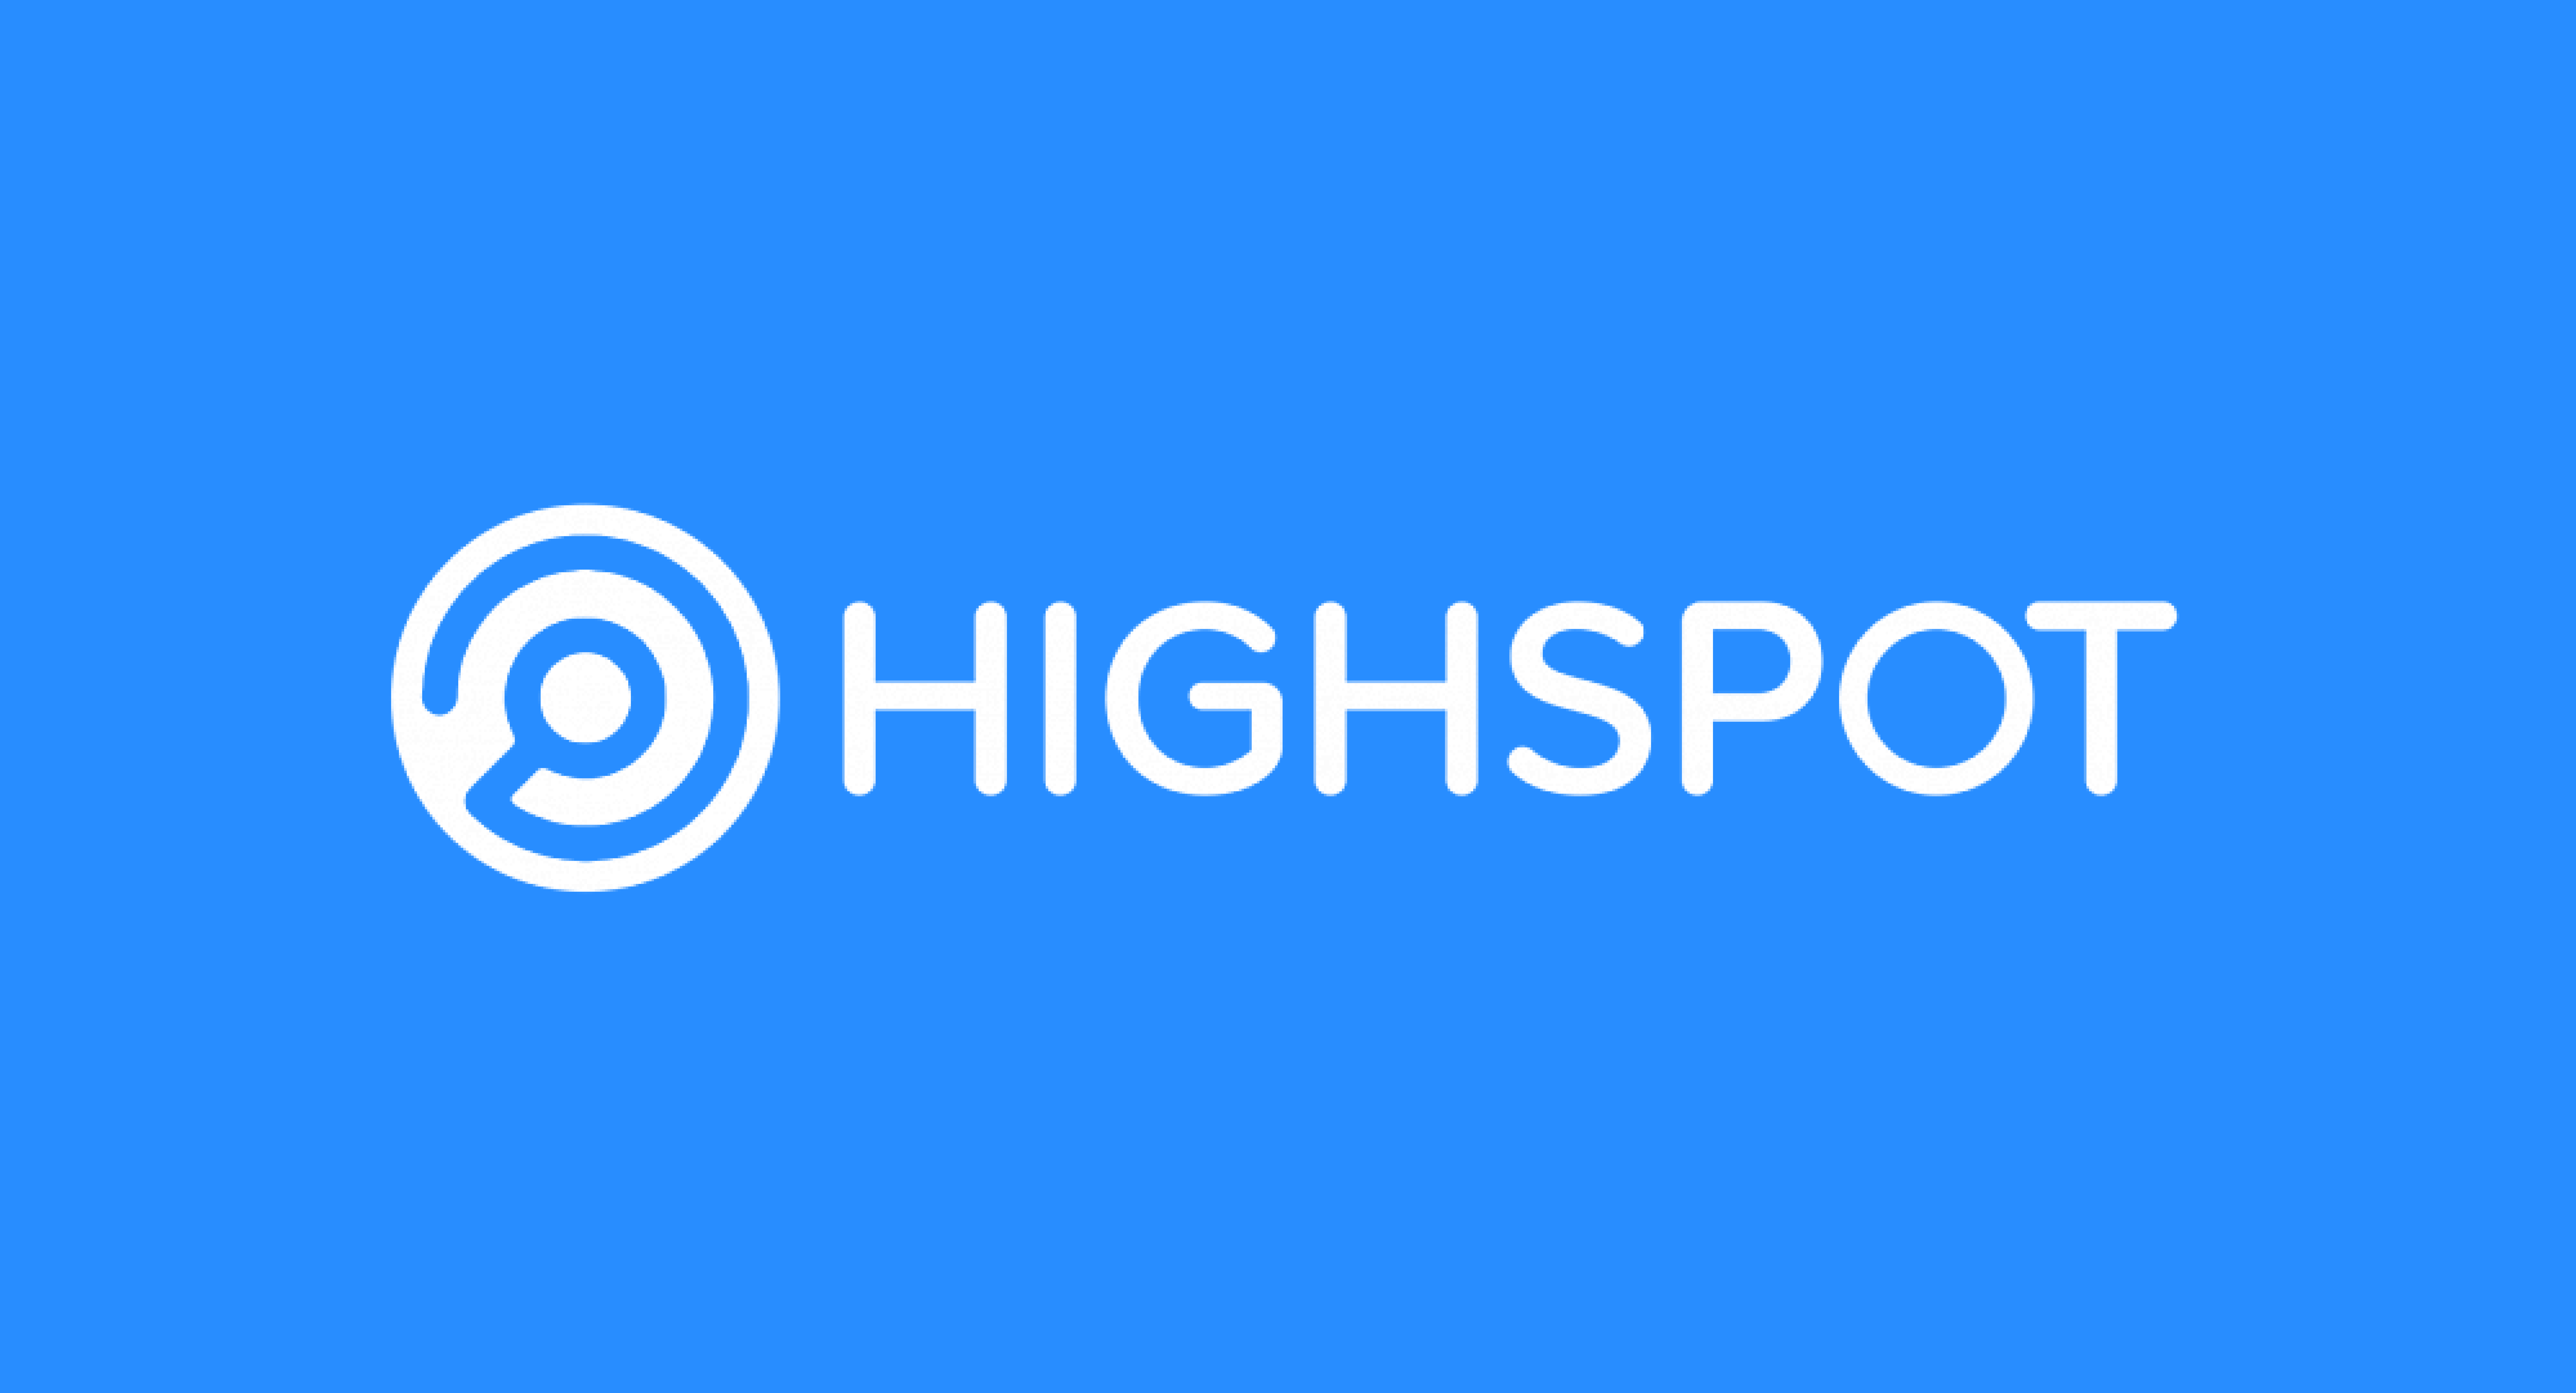 85% of Highspot’s Closed Won Opportunities Influenced by G2